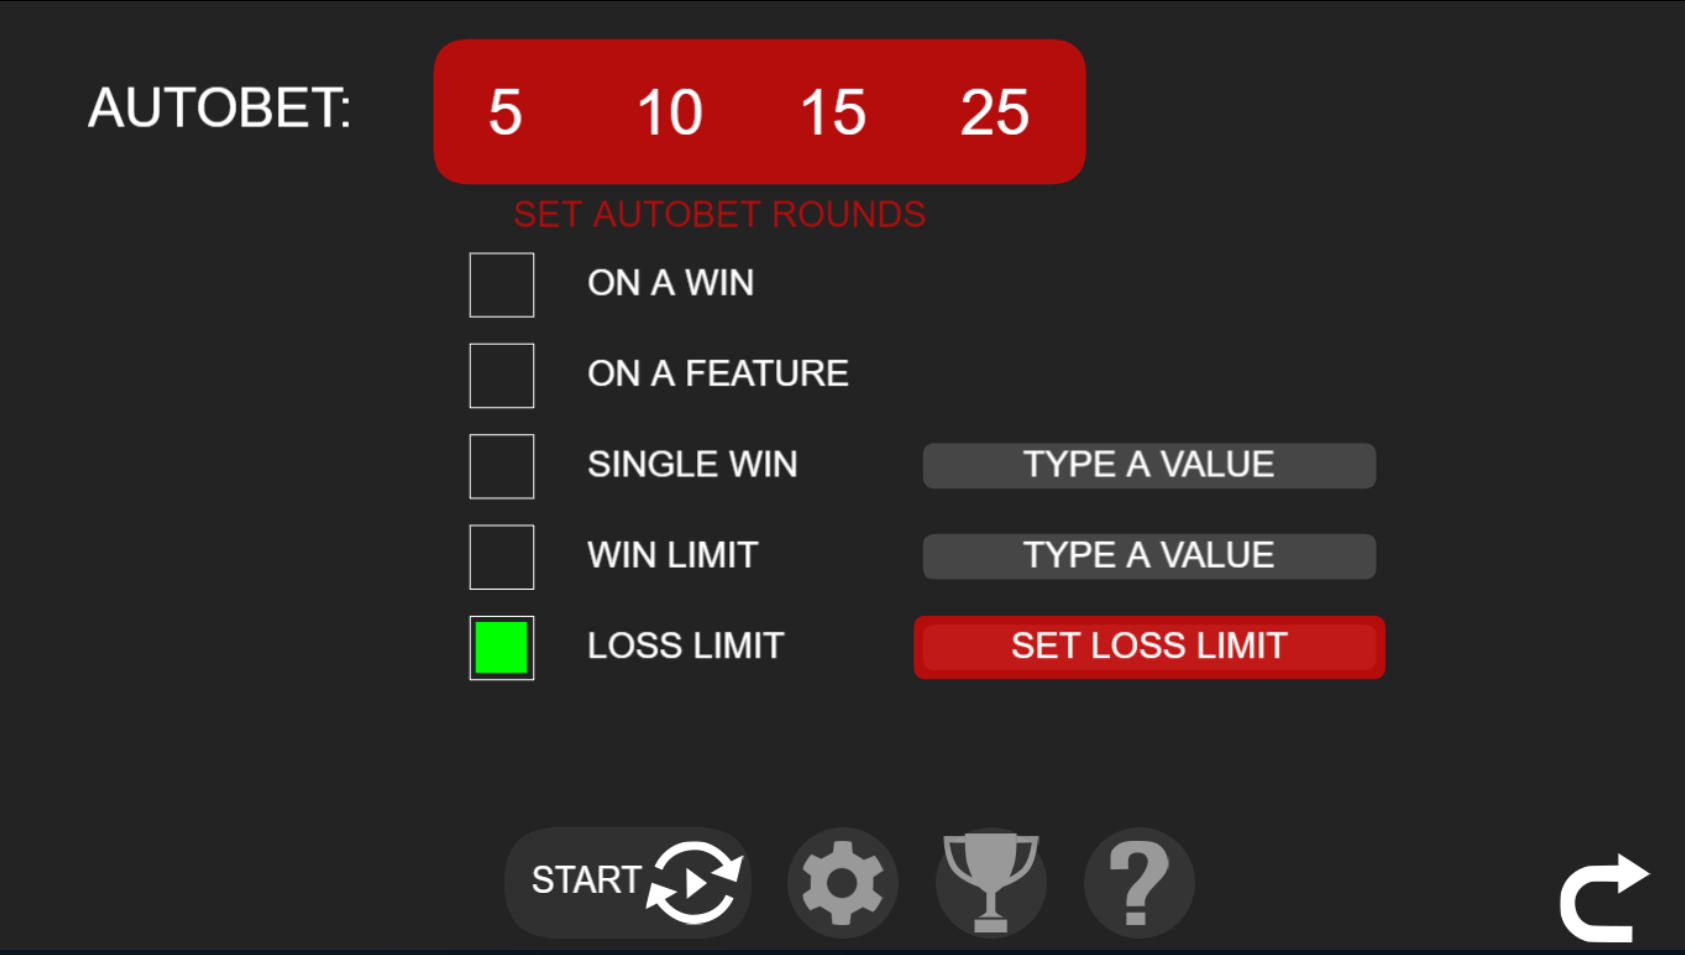 Sharknado autobet settings for uk players.png